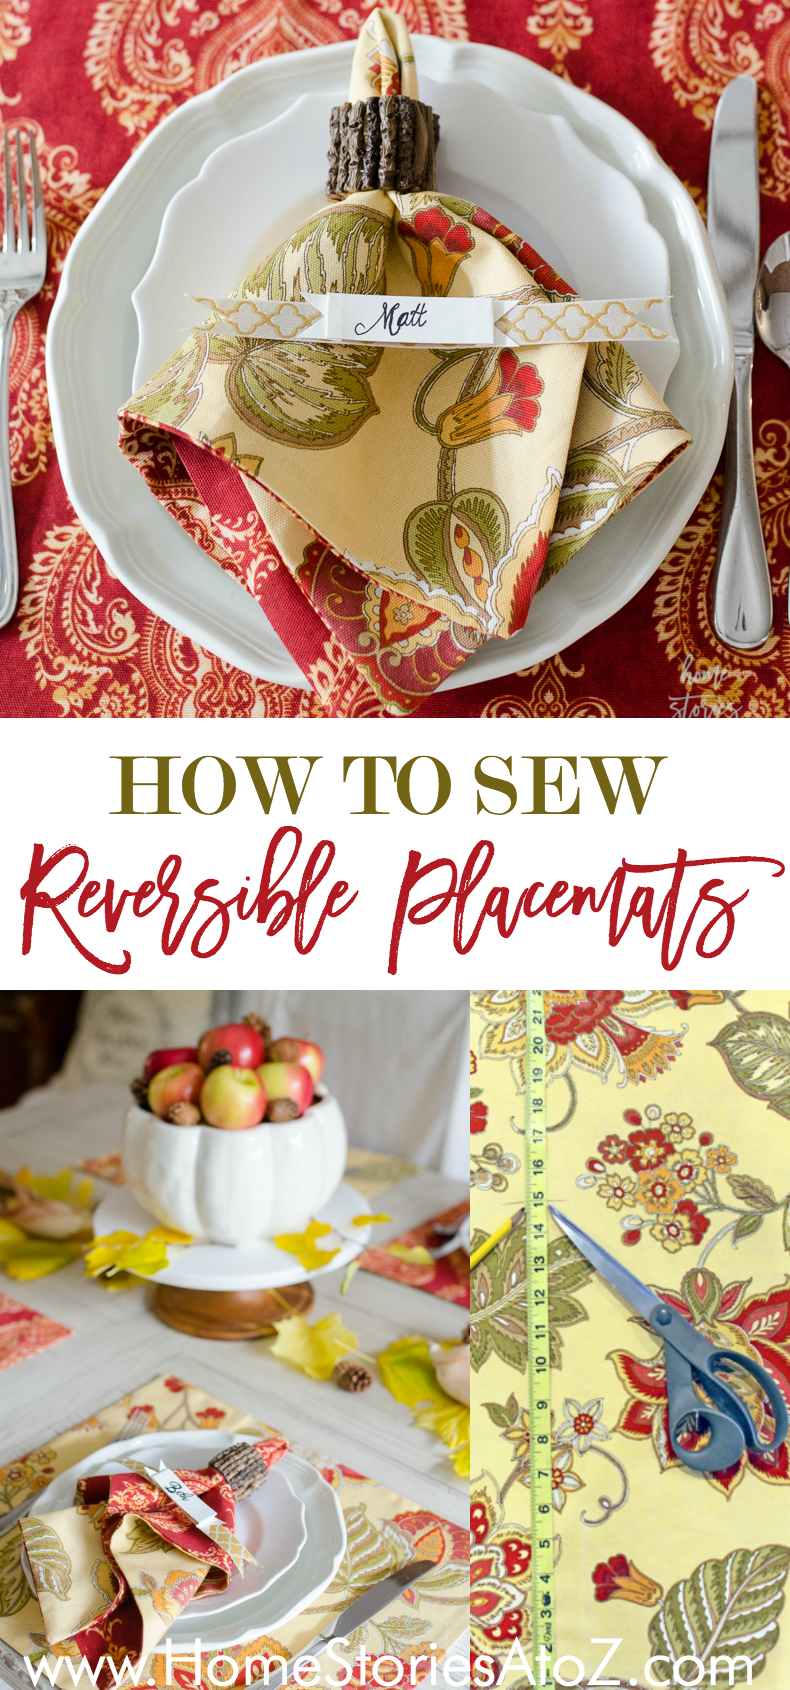 how-to-sew-reversible-placemats-easy-placemat-tutorial